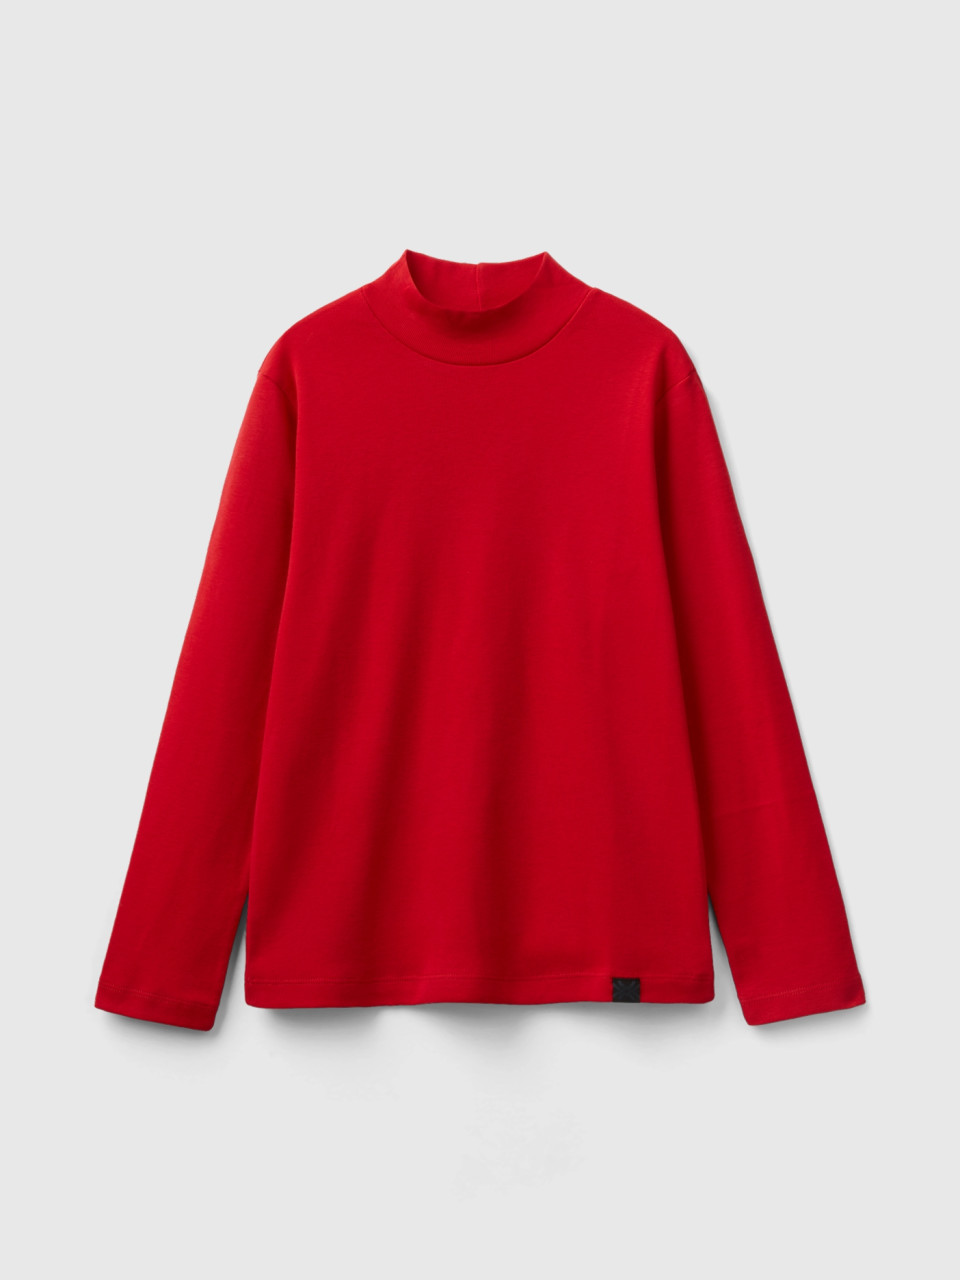 Benetton, Rubbed Knit Turtleneck T-shirt, Red, Kids